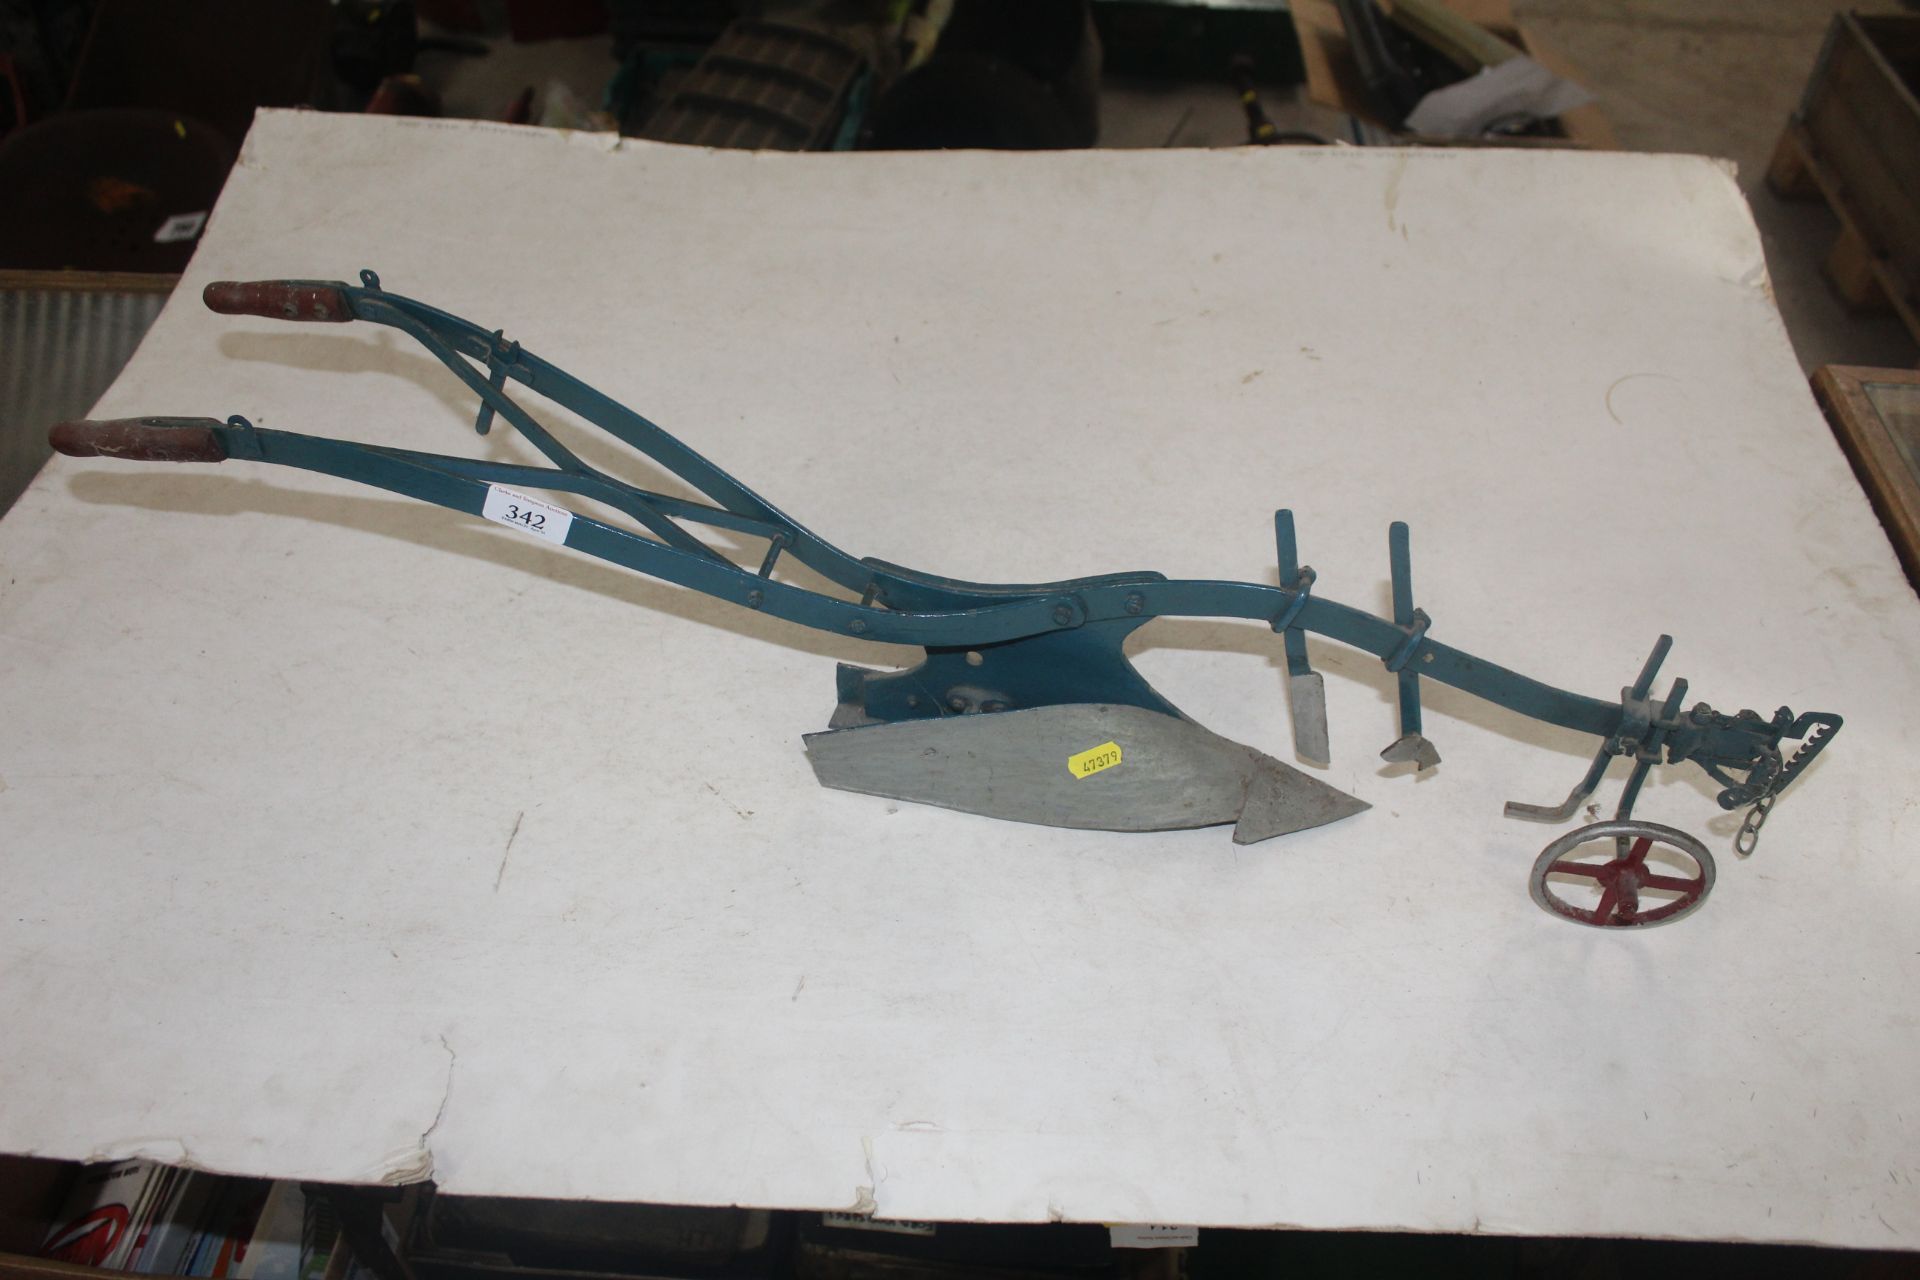 Model of a Ransomes horse plough.